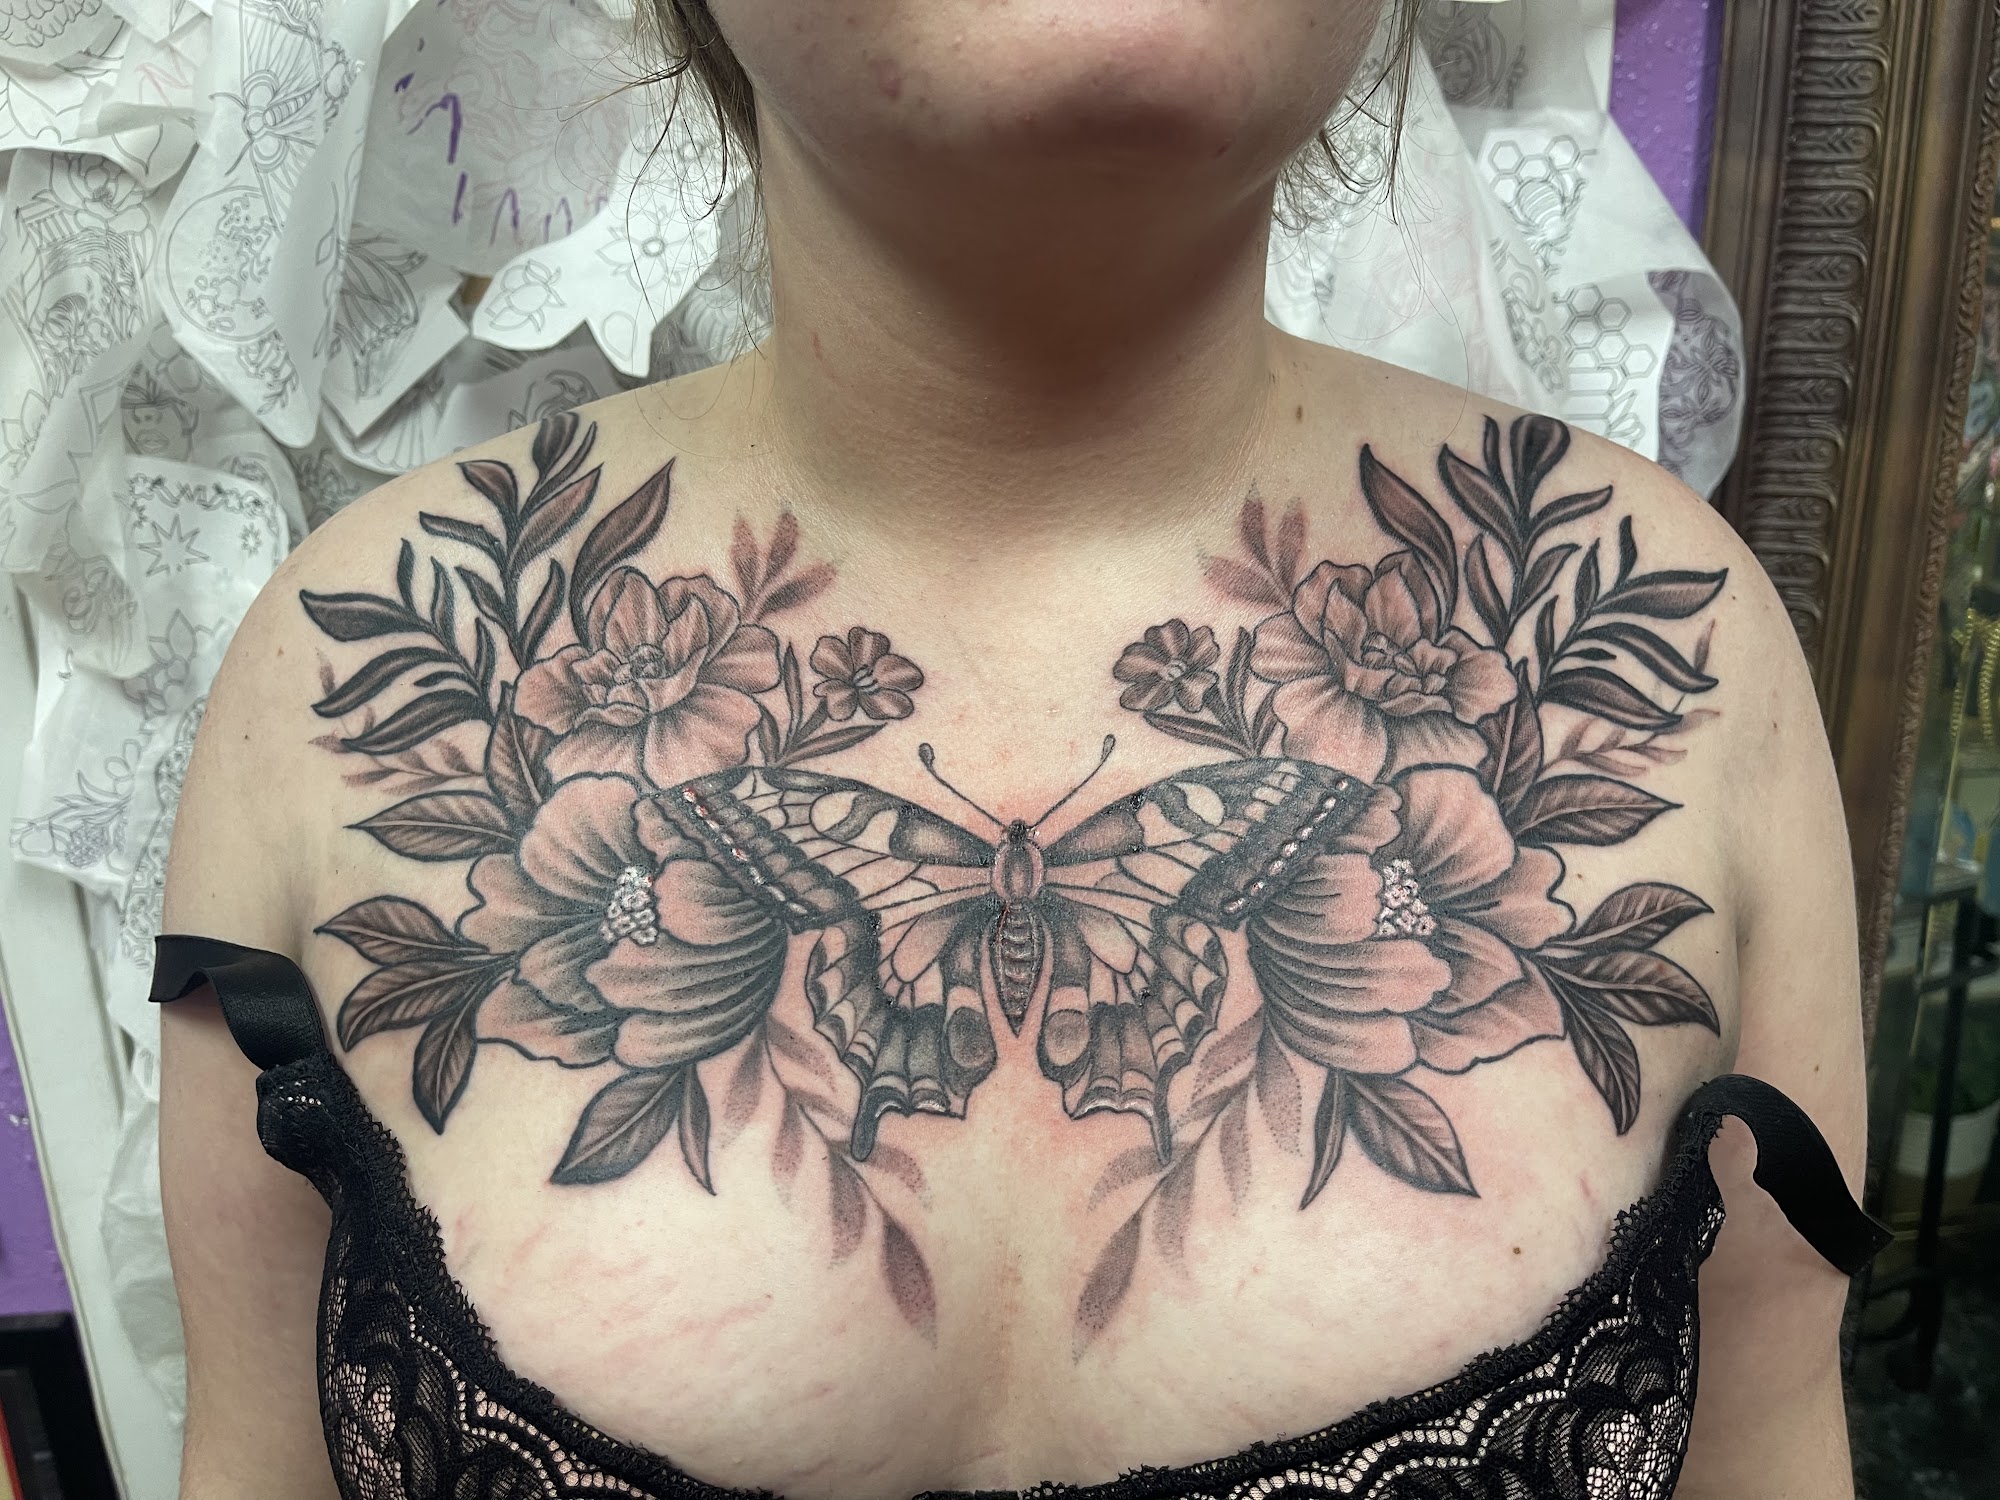 Queen of hearts tattoo & piercings 407 5th St, Marysville California 95901